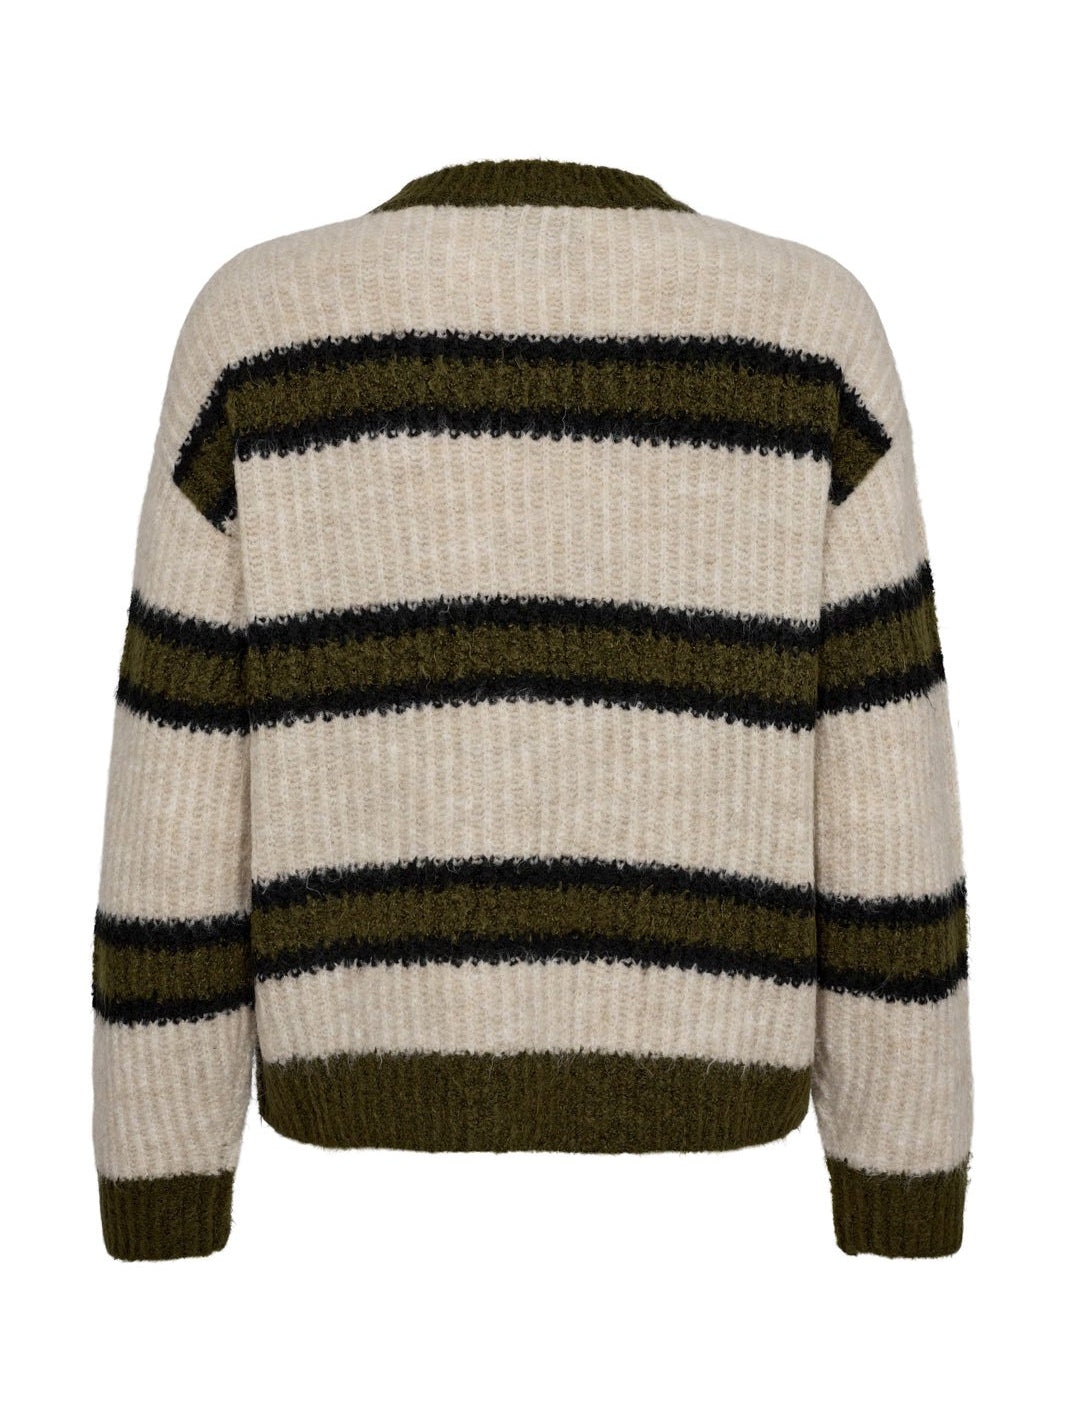 Liberté Fro pullover sand/army/black stripe - Online-Mode